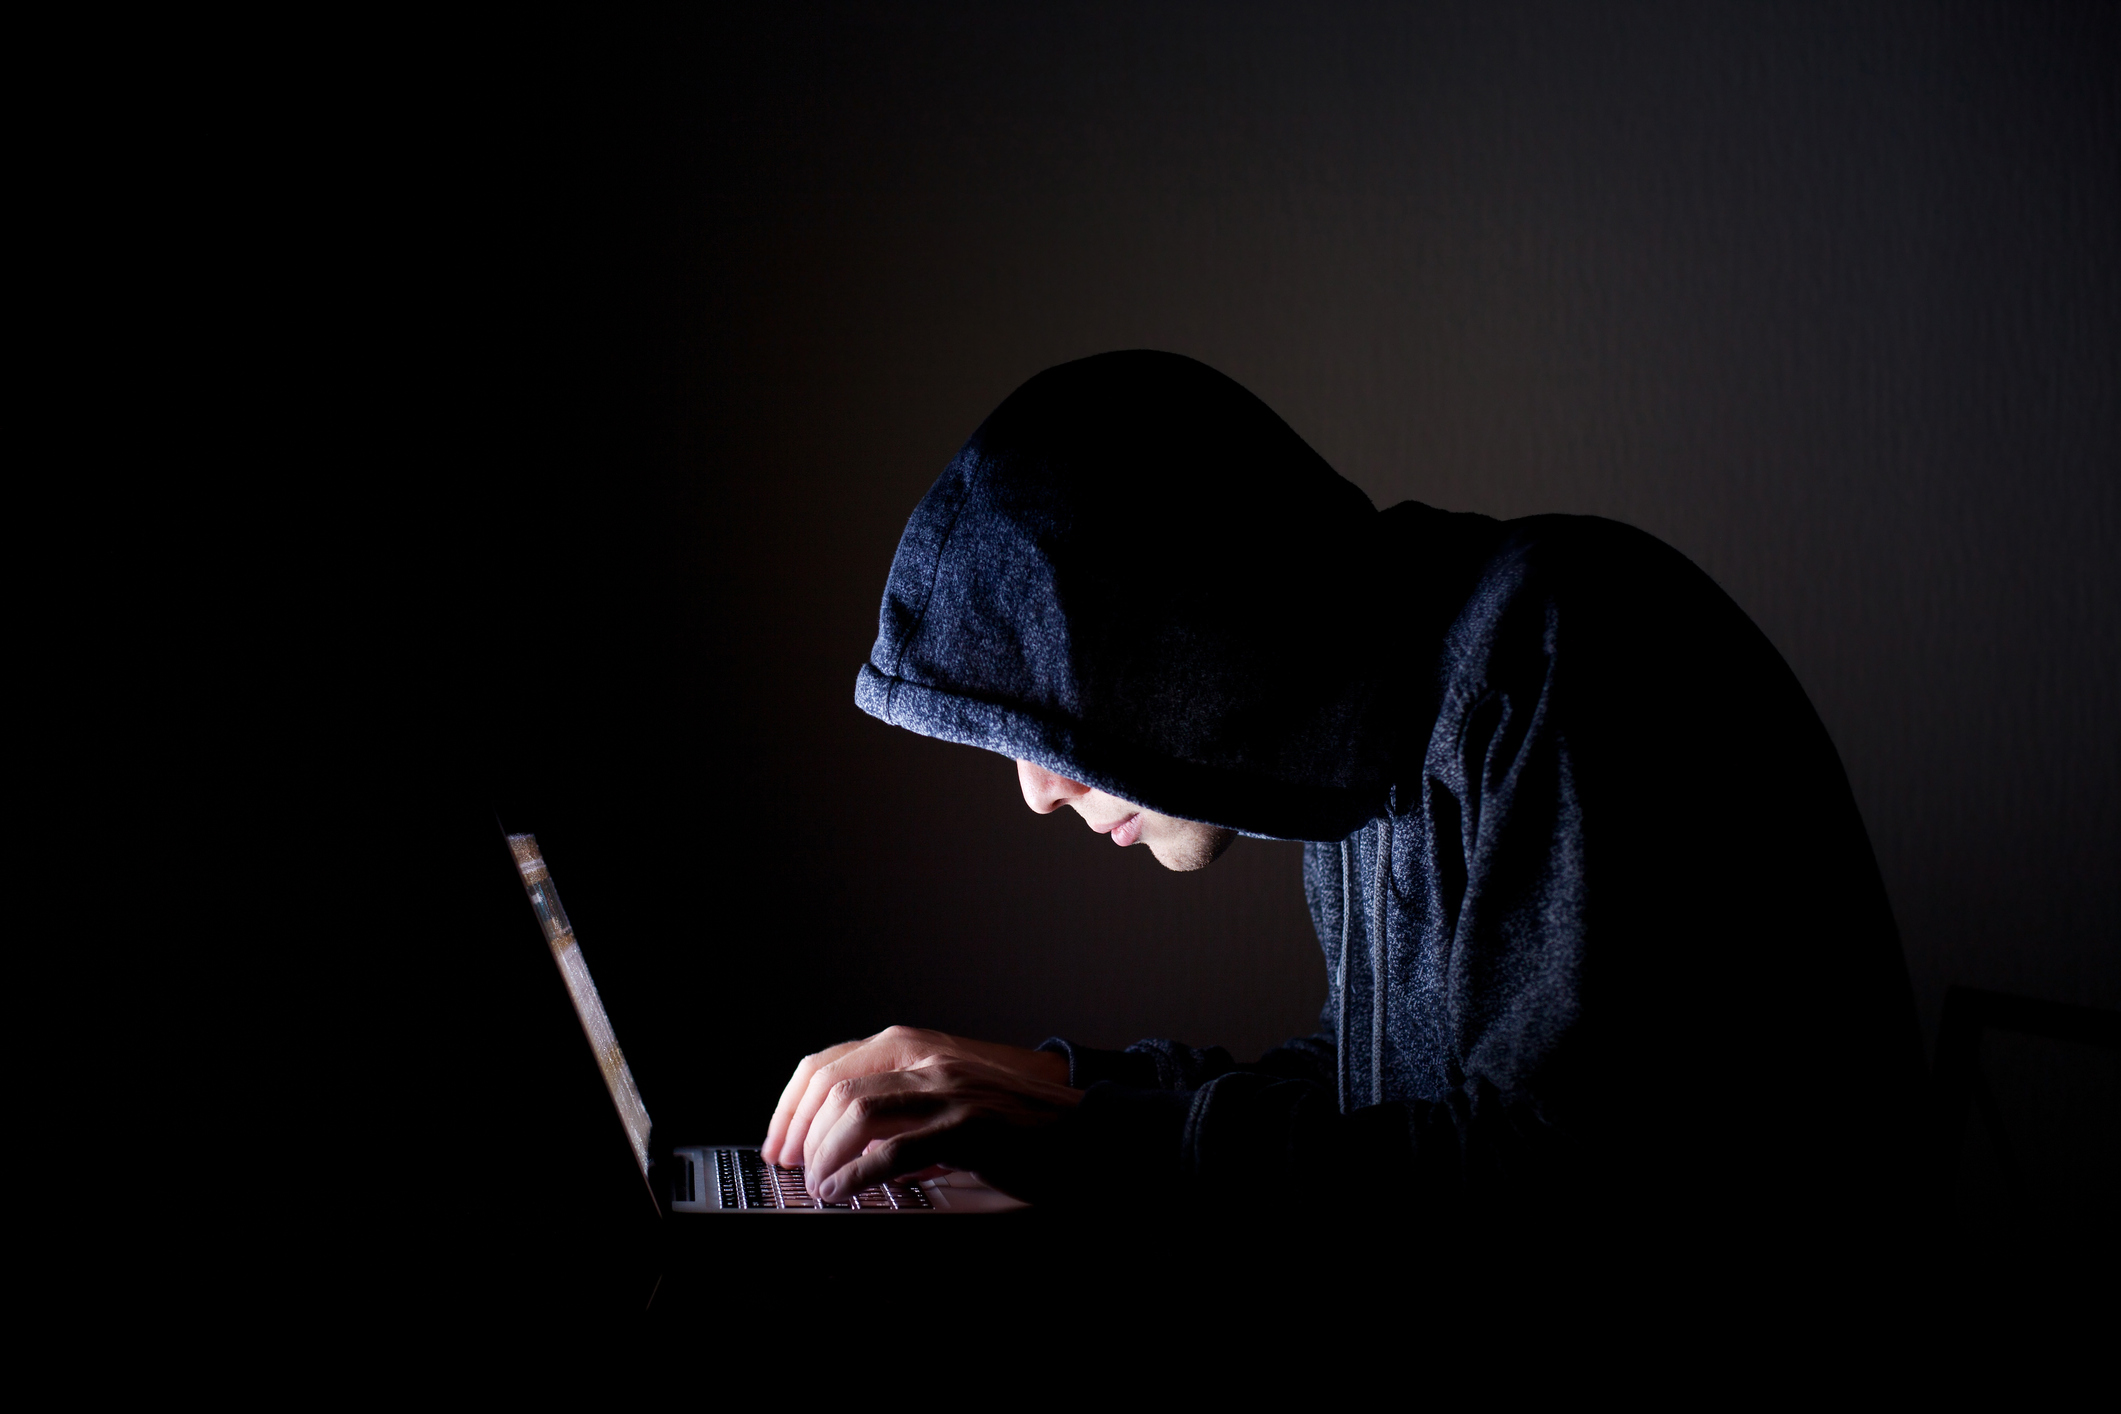 On the dark web, cybercriminals are selling services to hack